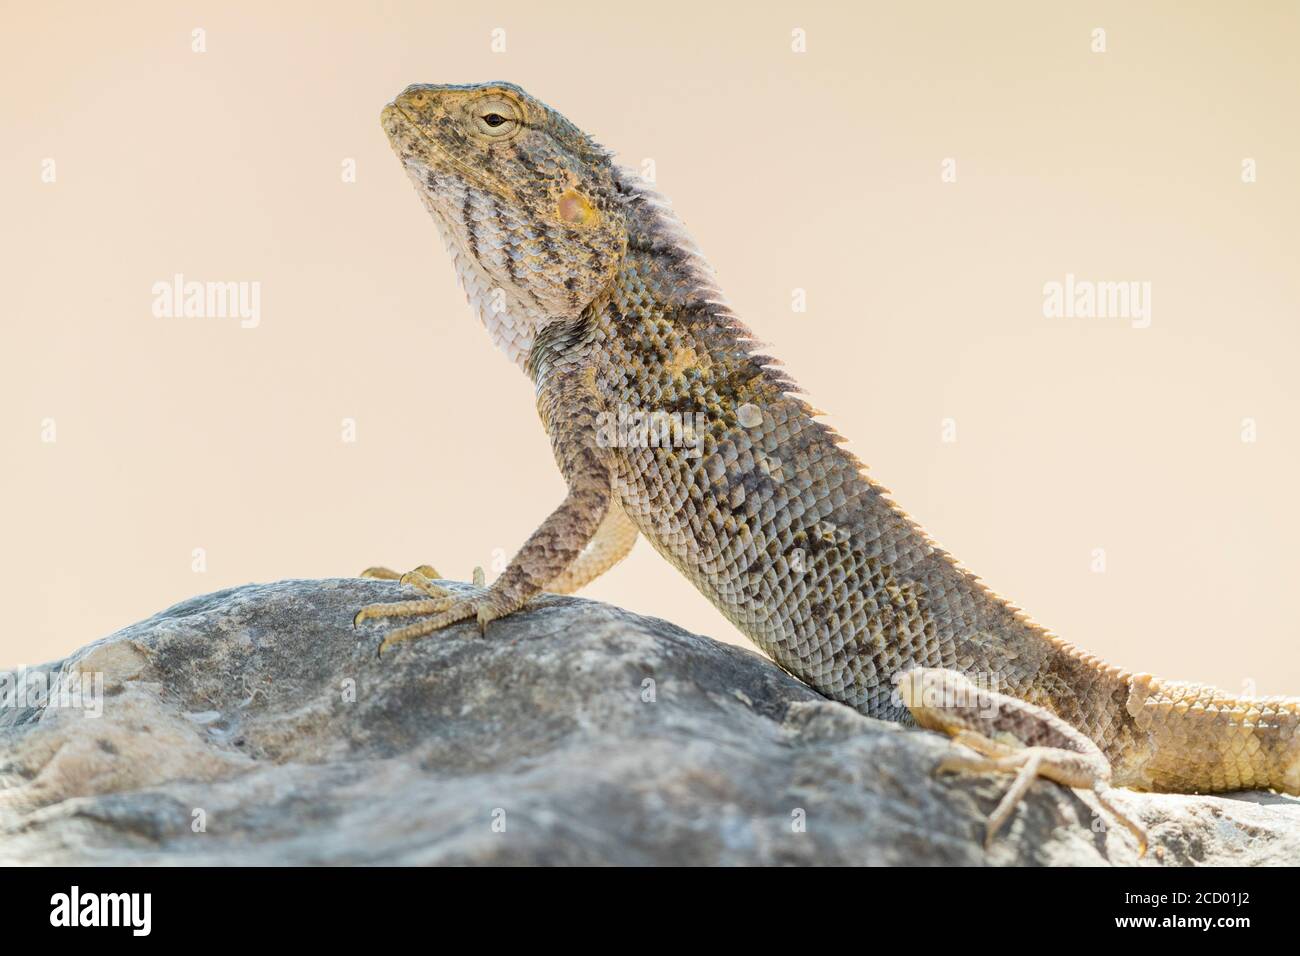 Yellow-spotted Agama (Trapelus flavimaculatus), close-up of an individual standing on a rock, Dhofar, Oman Stock Photo